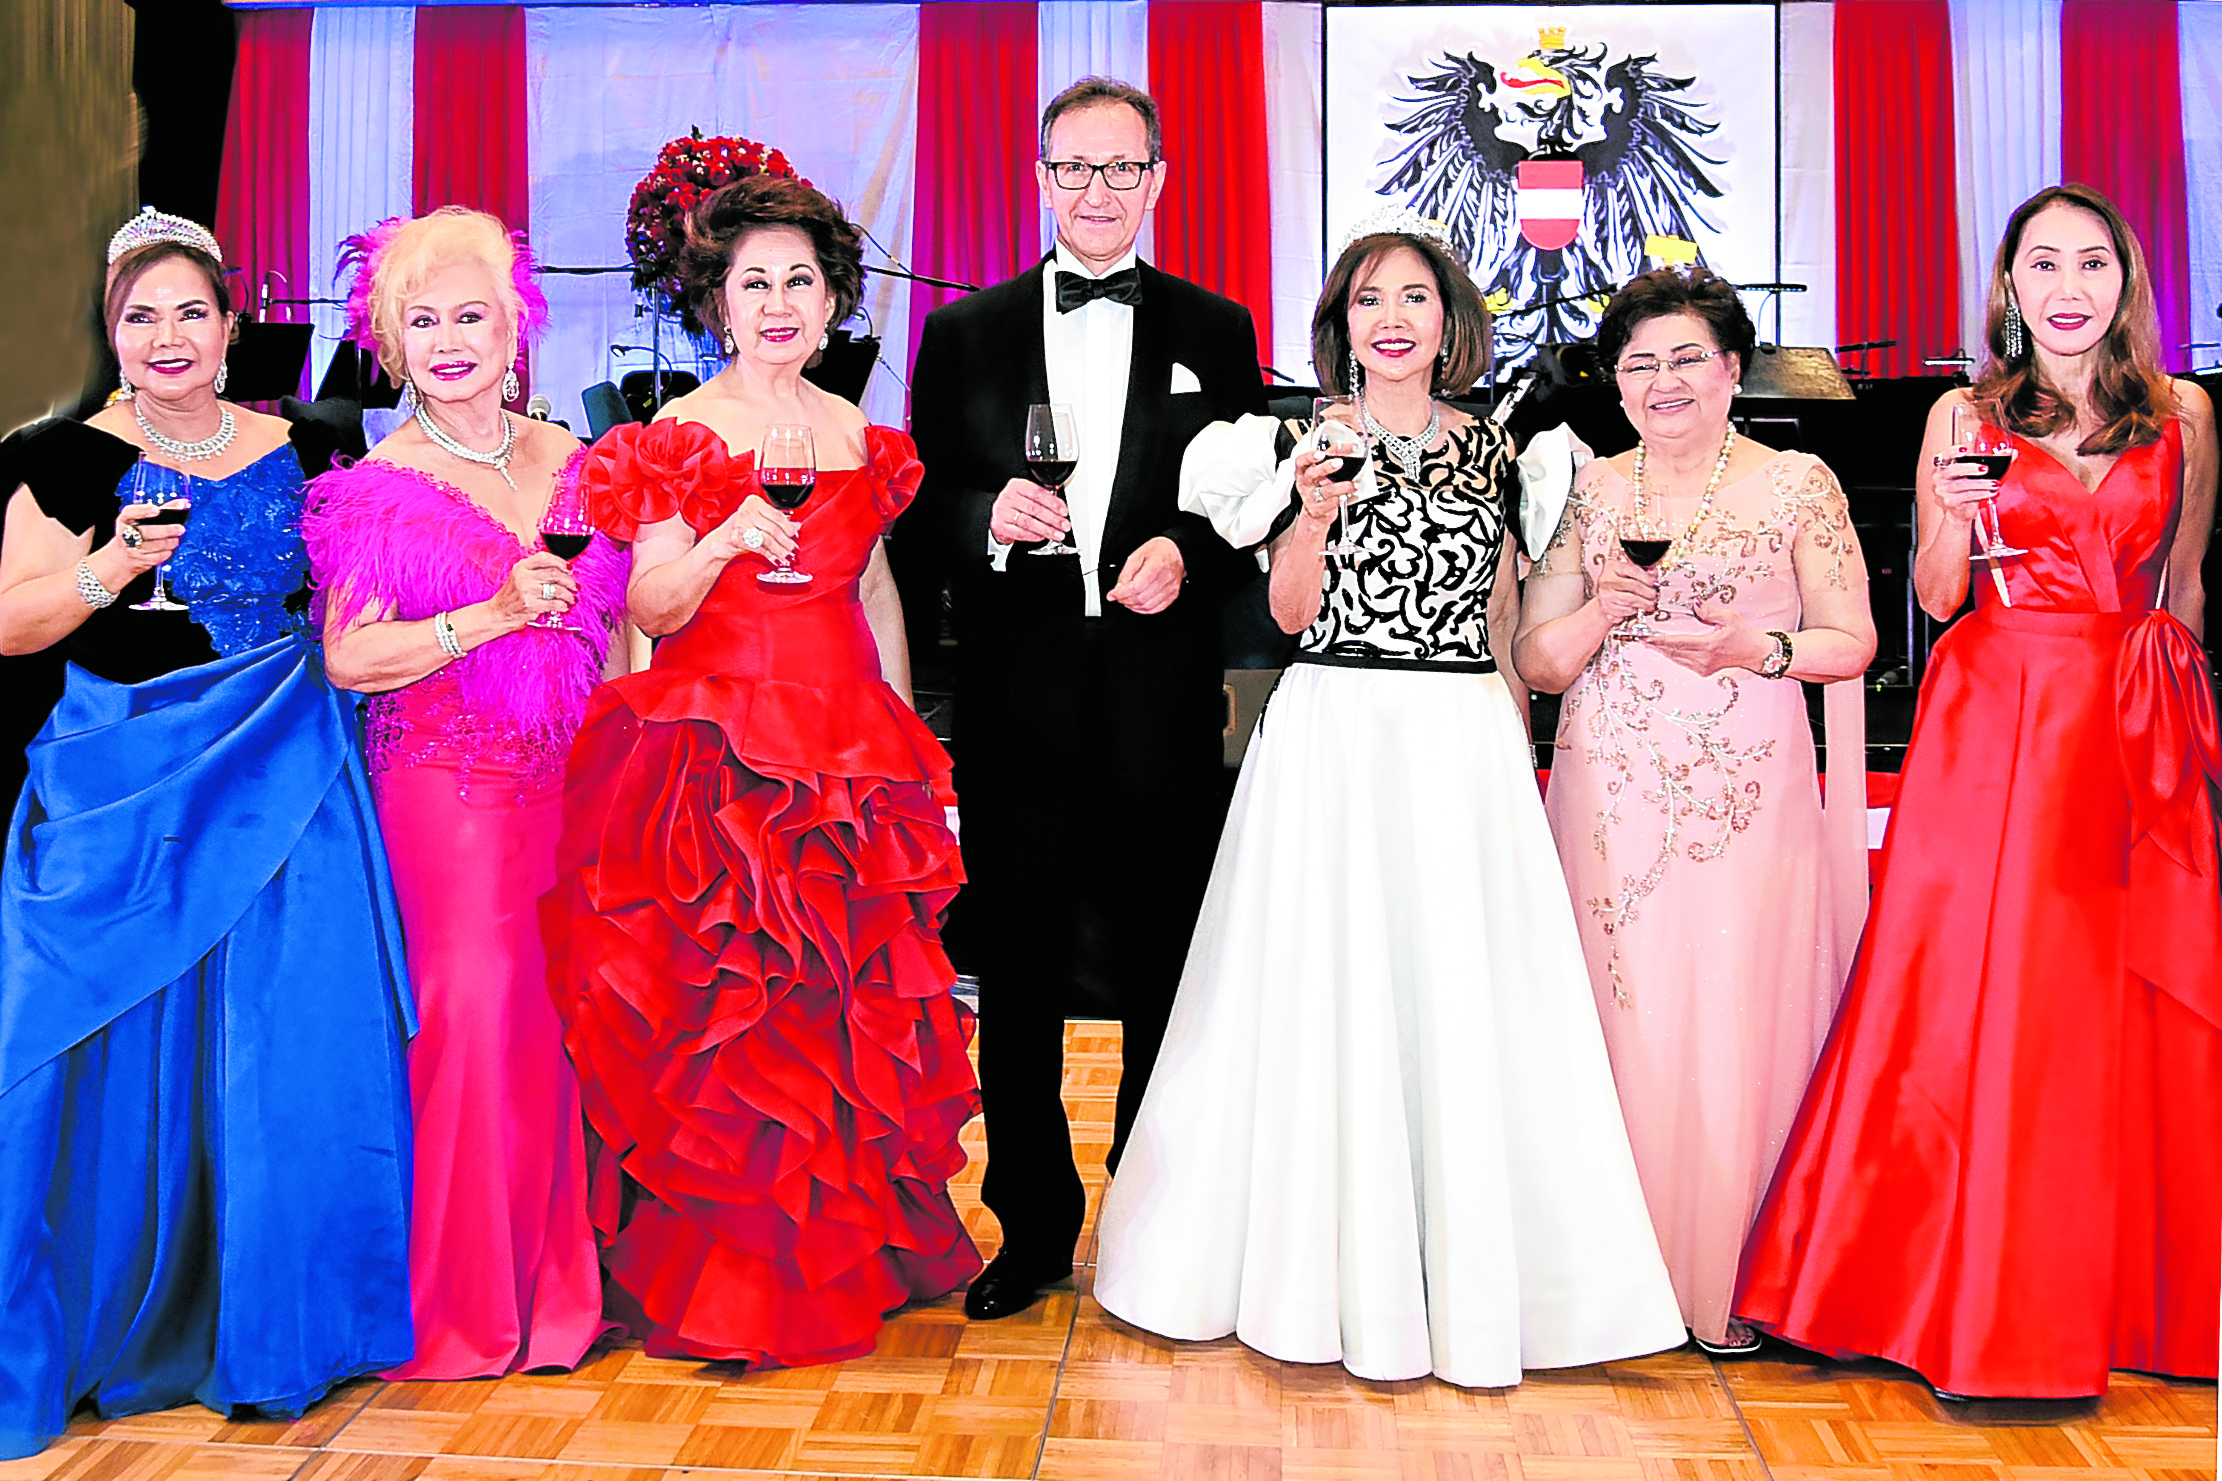 Johann Strauss Society springs back to life for 25th anniversary